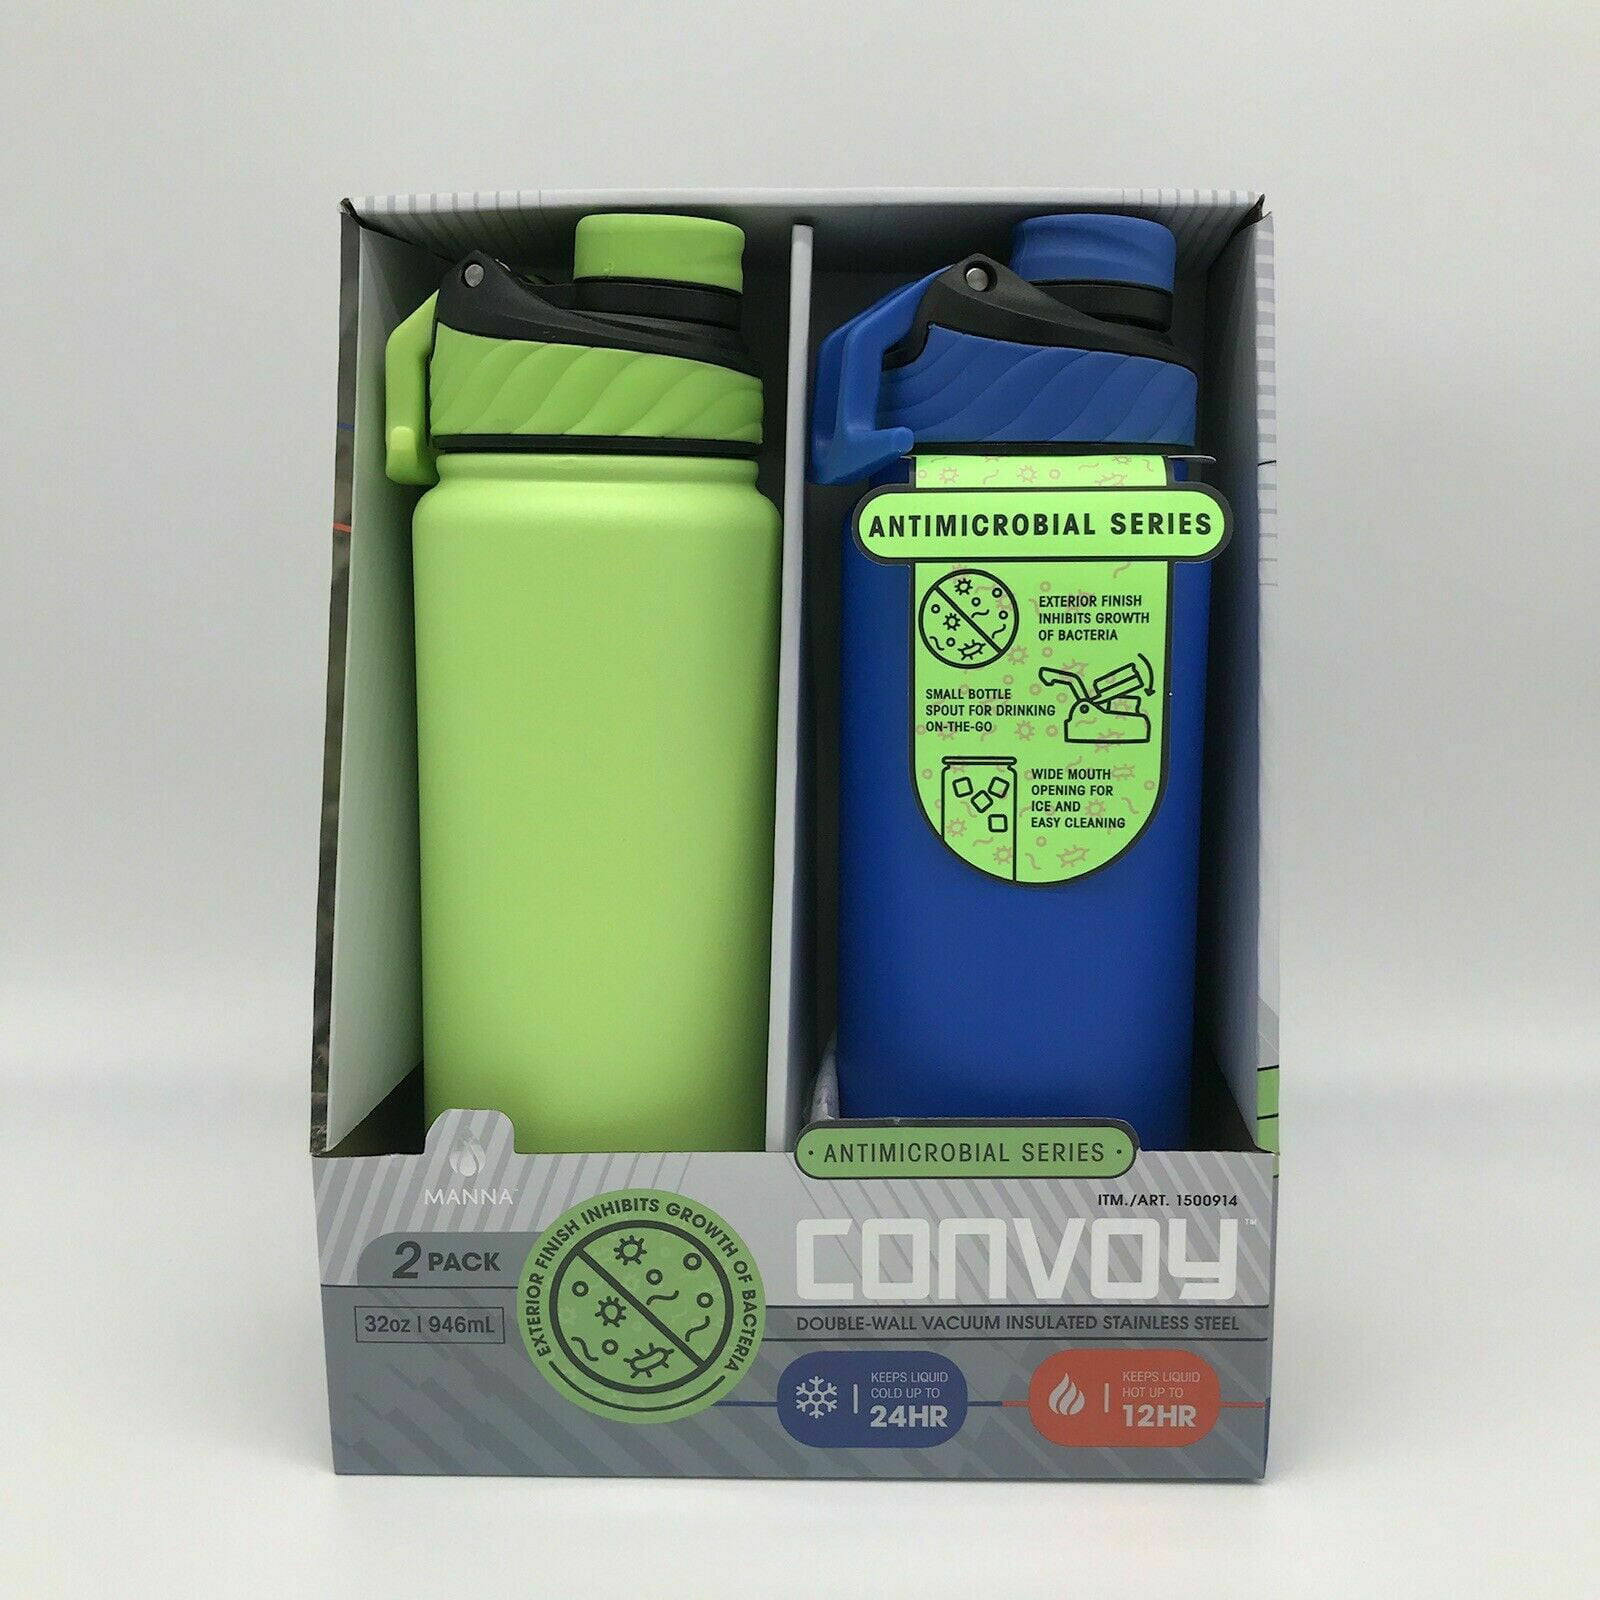 Manna Double-Wall Vacuum Insulated Stainless Steel Convoy Water Bottles 2pc 32oz 